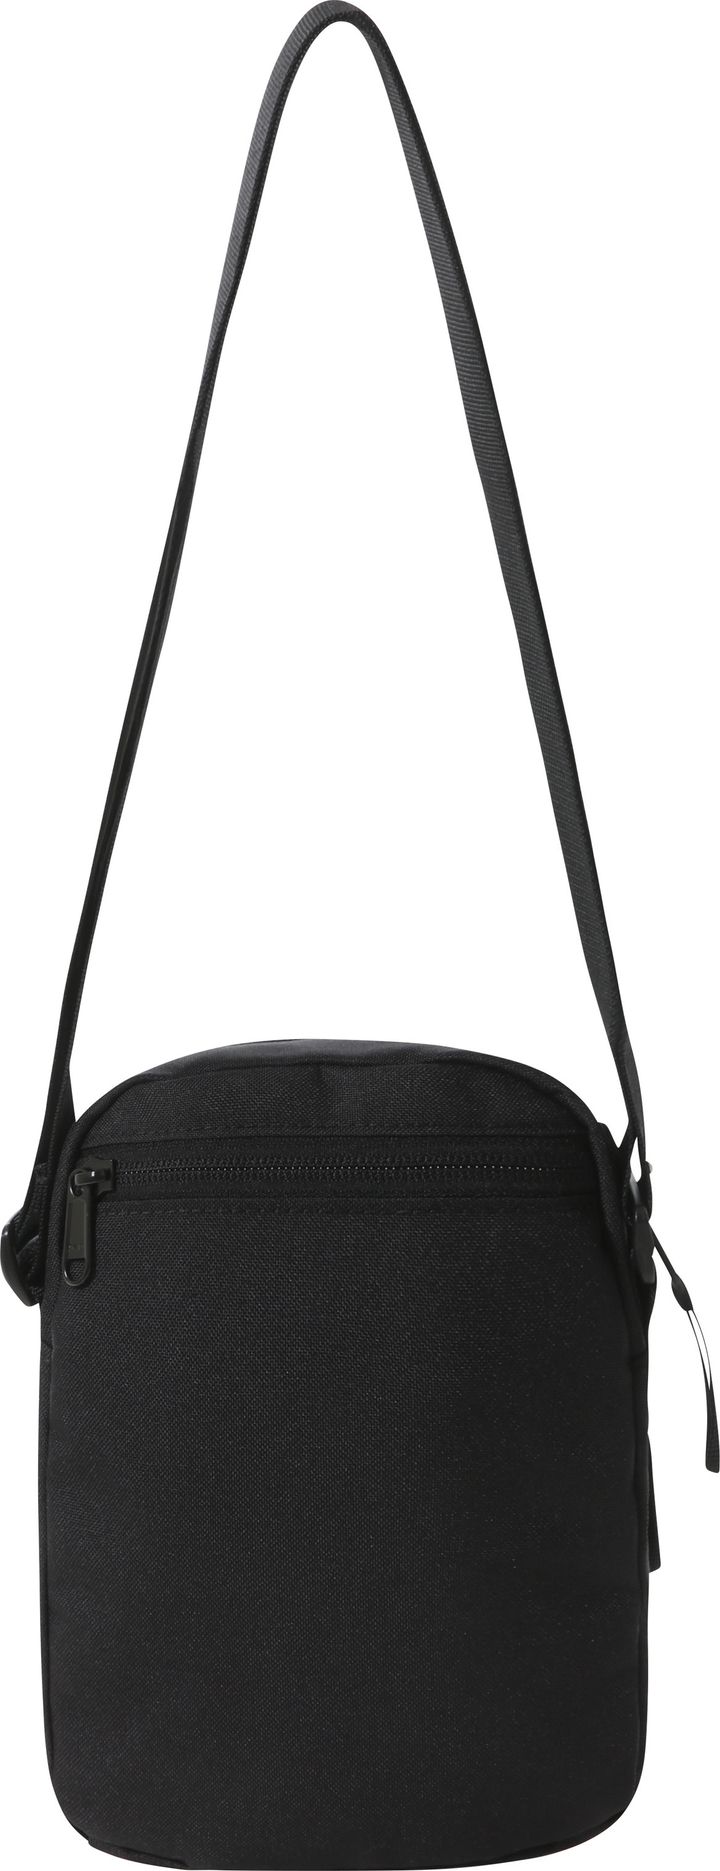 The North Face Jester Cross Body Bag TNF Black The North Face